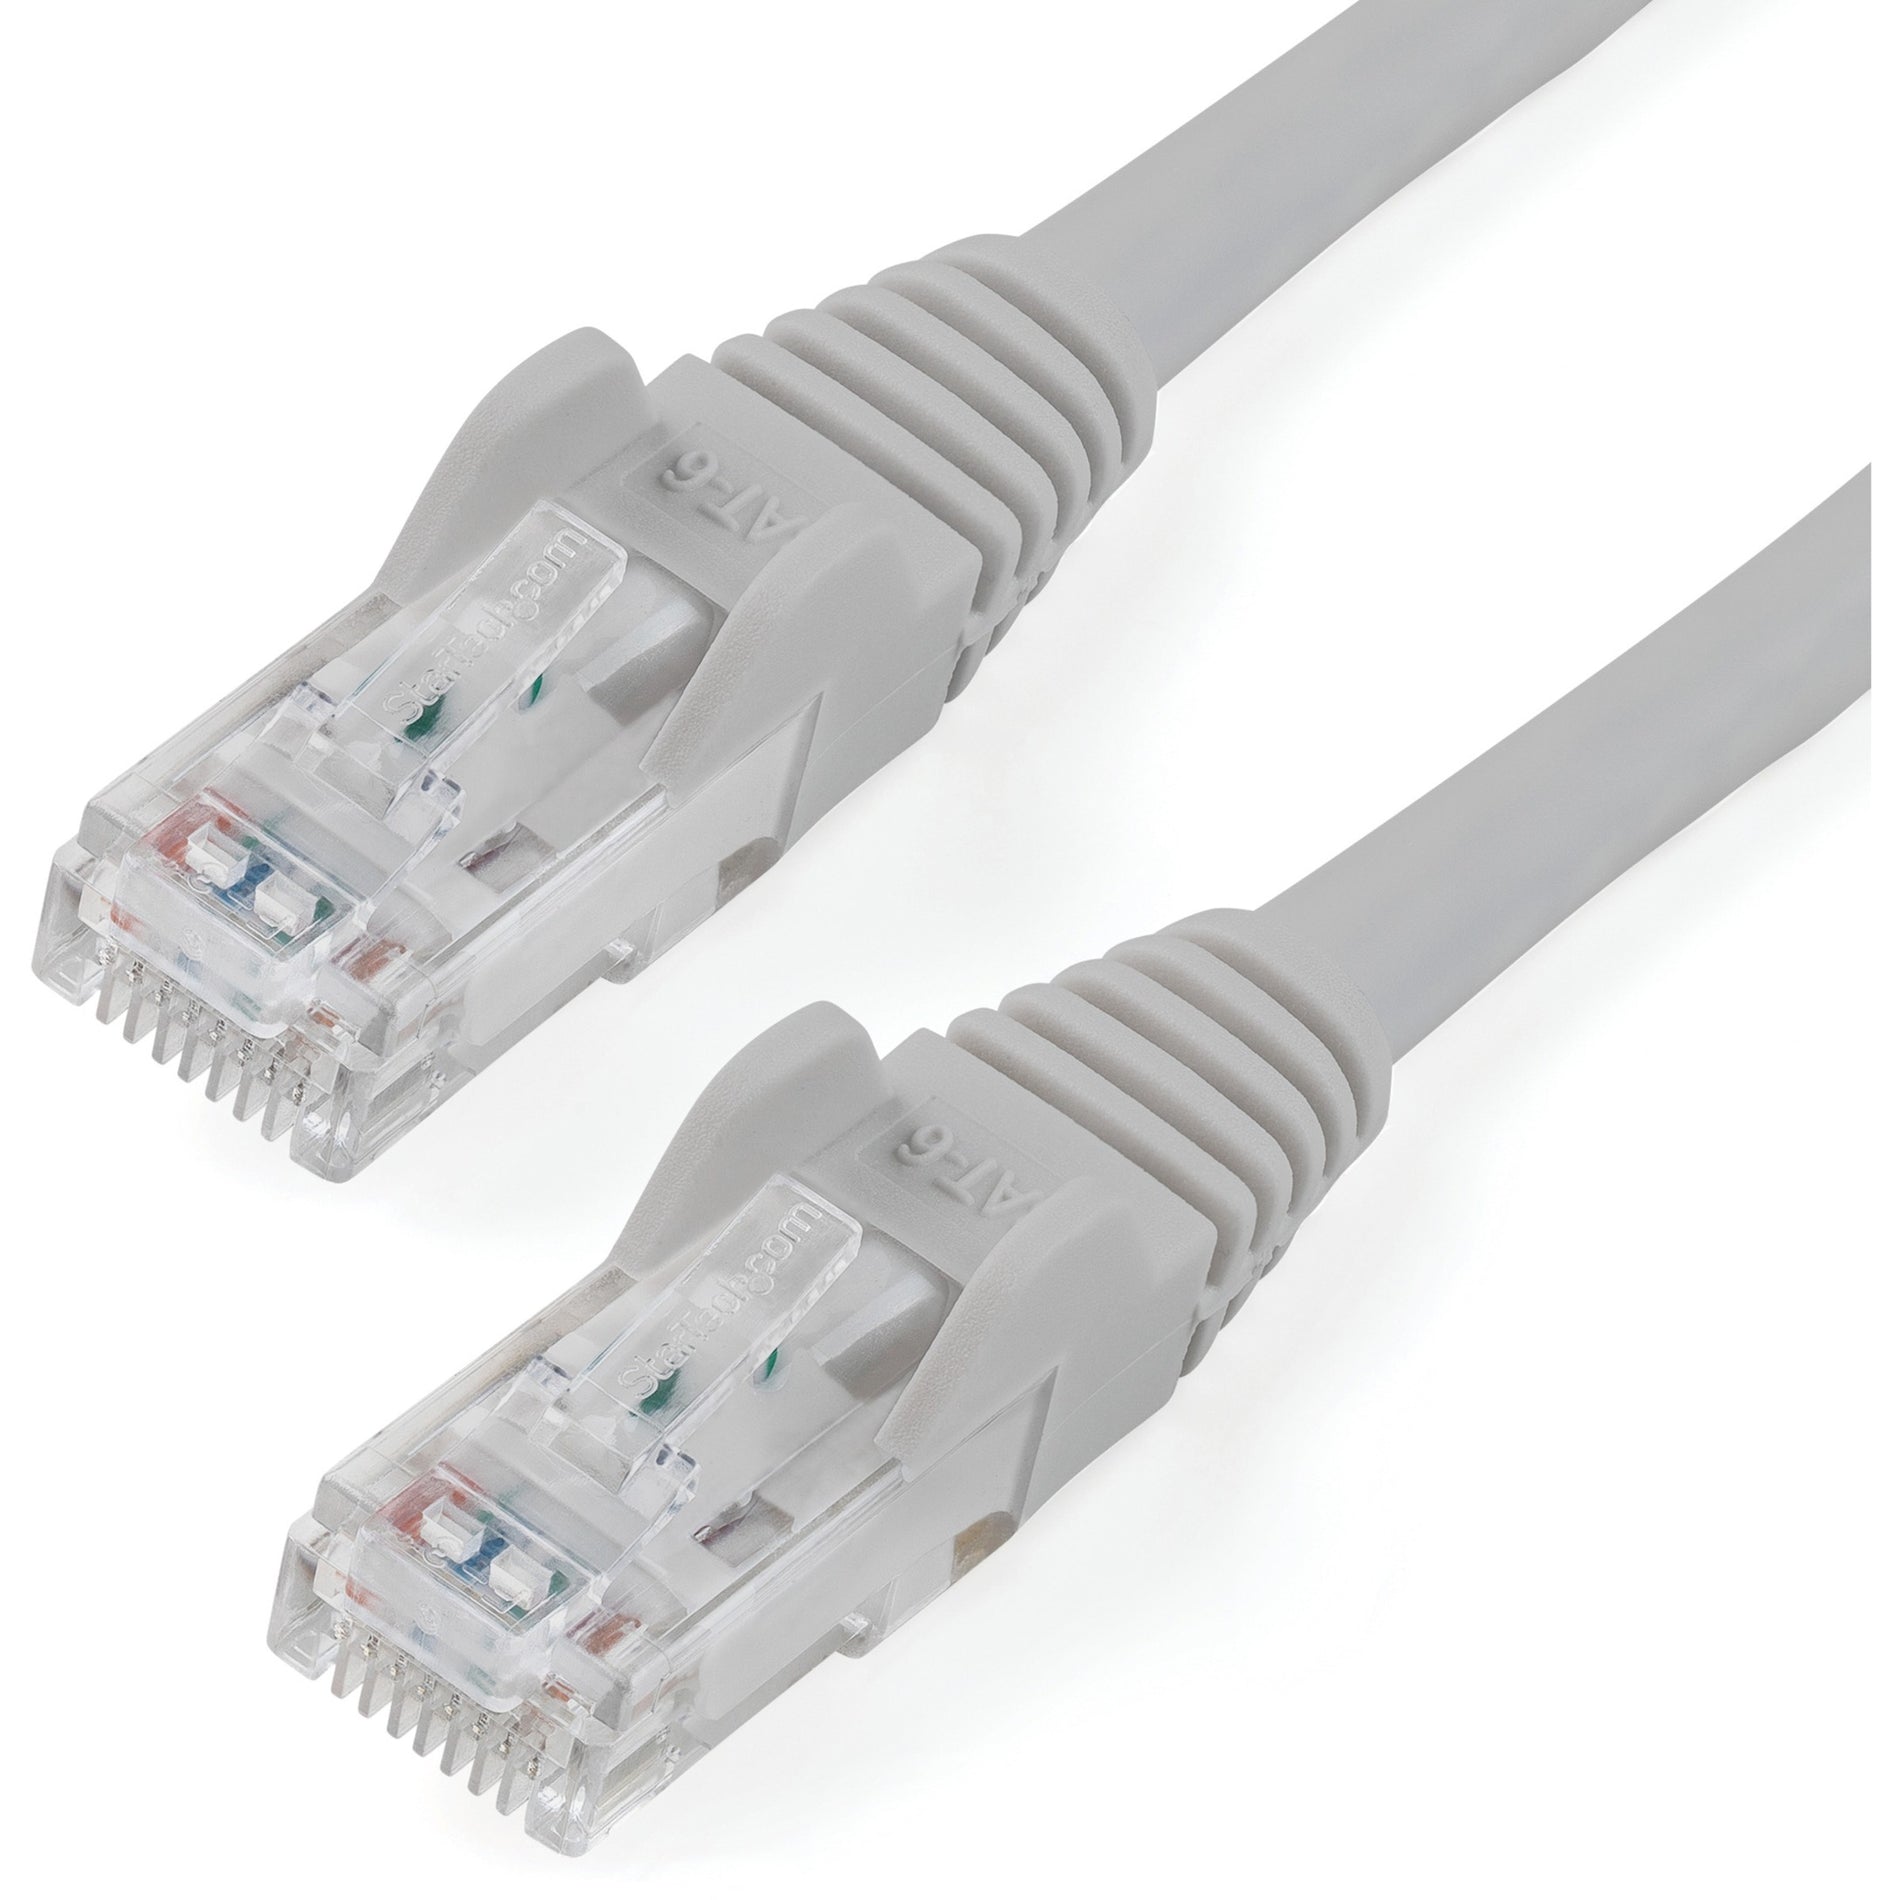 StarTech.com N6PATCH25GR 25 ft Gray Snagless Cat6 UTP Patch Cable, 10 Gbit/s Data Transfer Rate, Lifetime Warranty